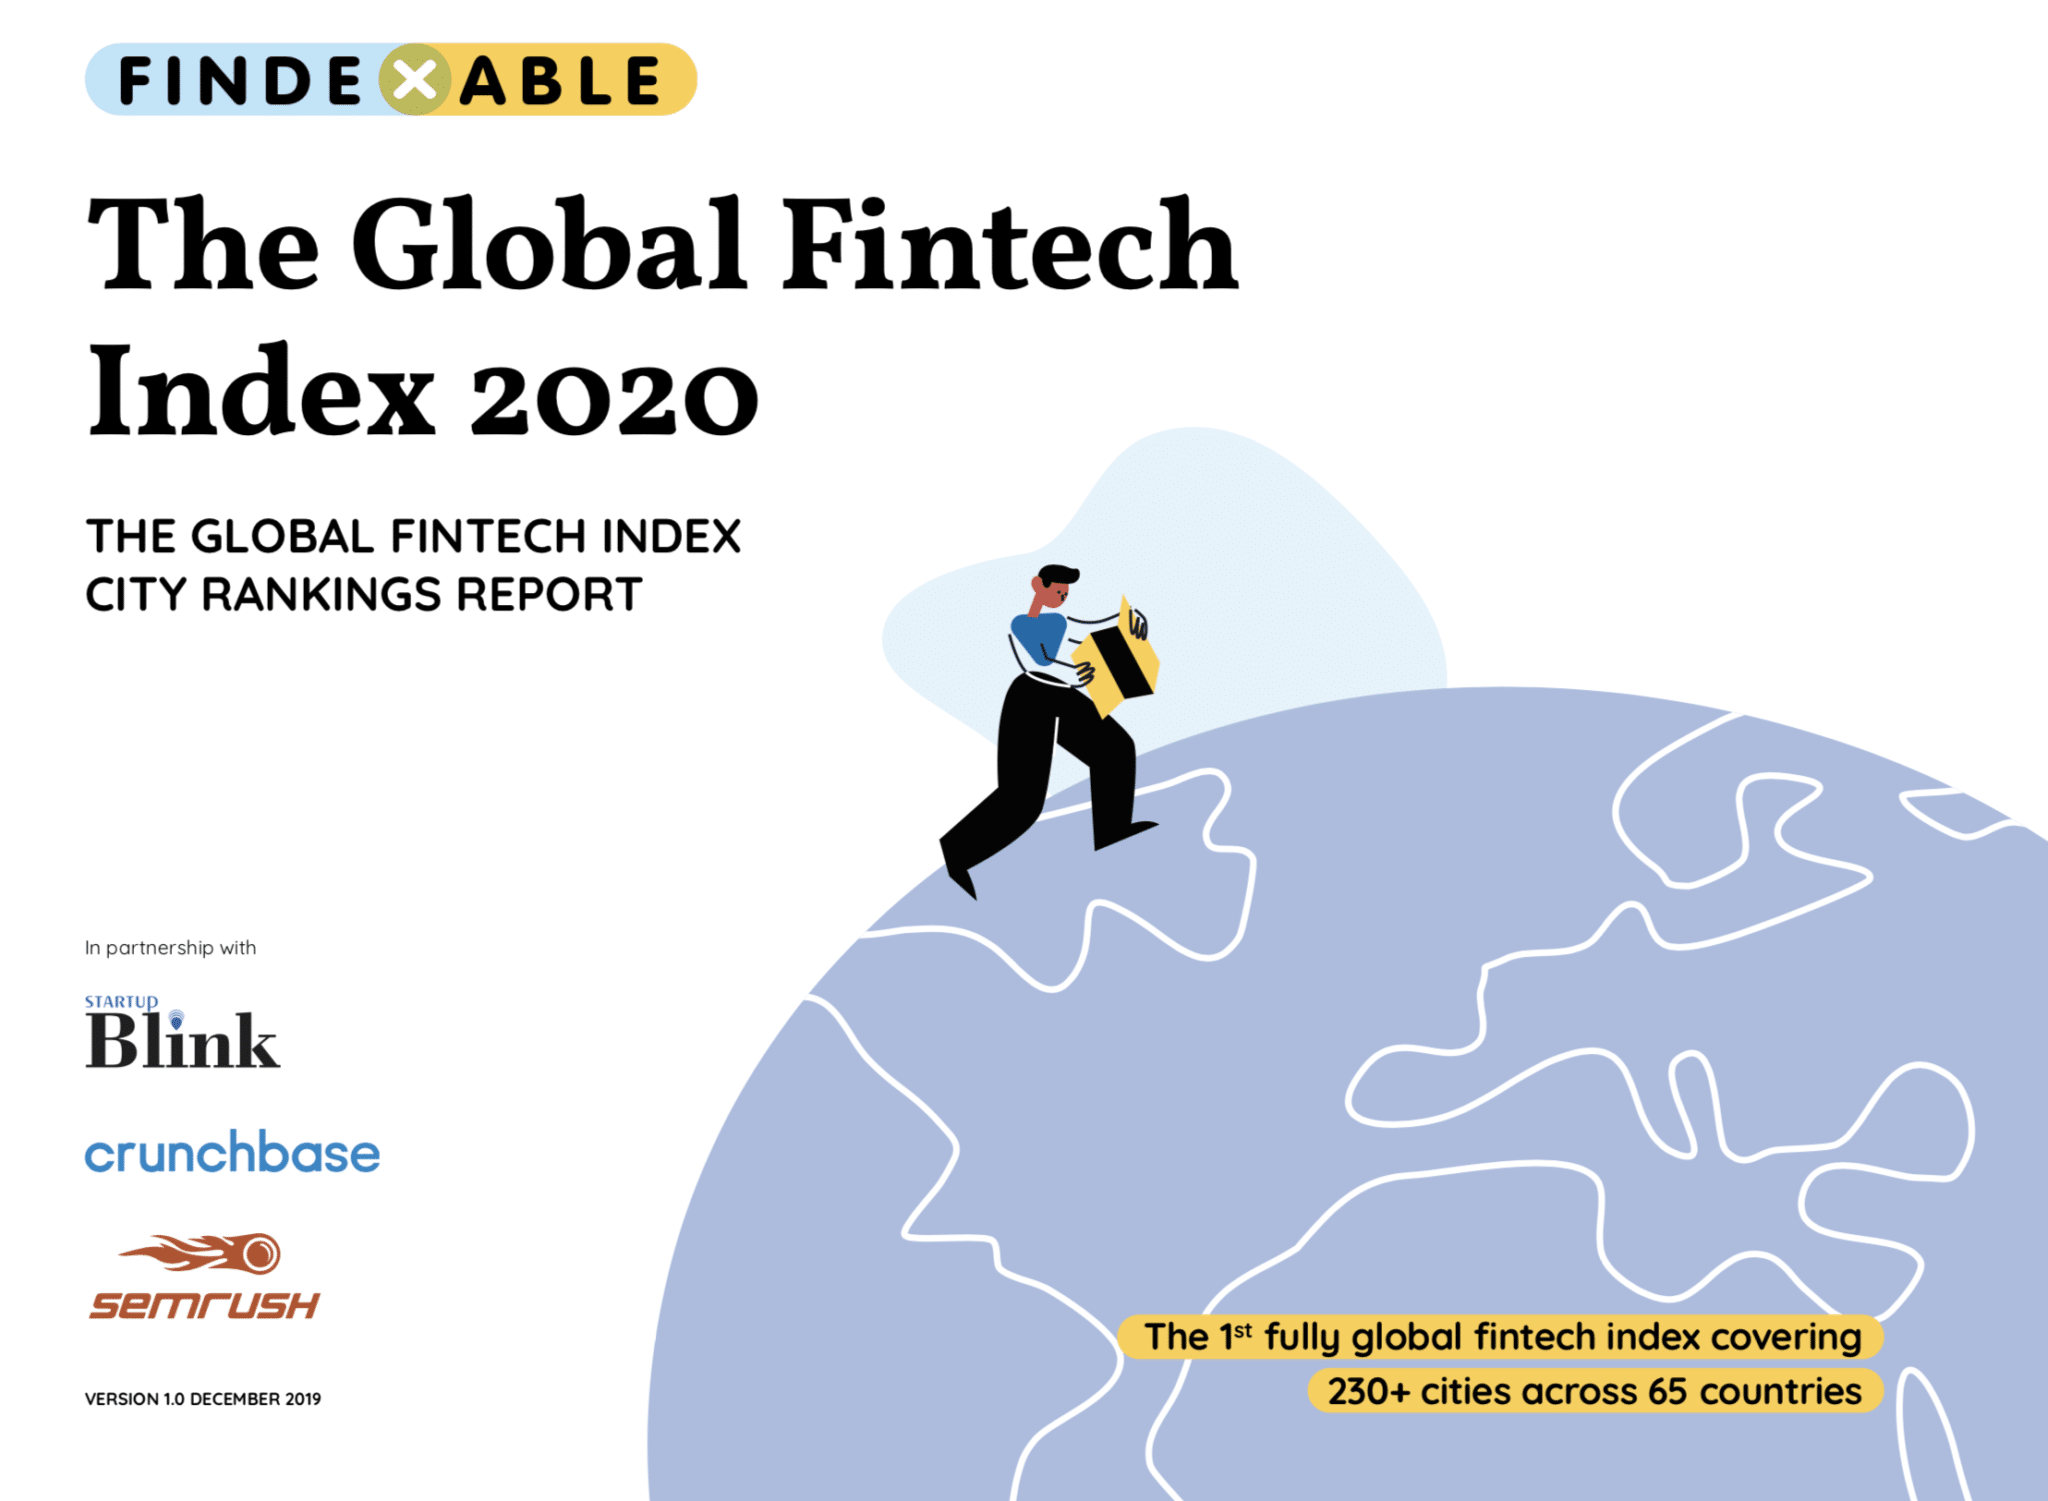 Findexable The Global Fintech Index 2020 - Crunchbase